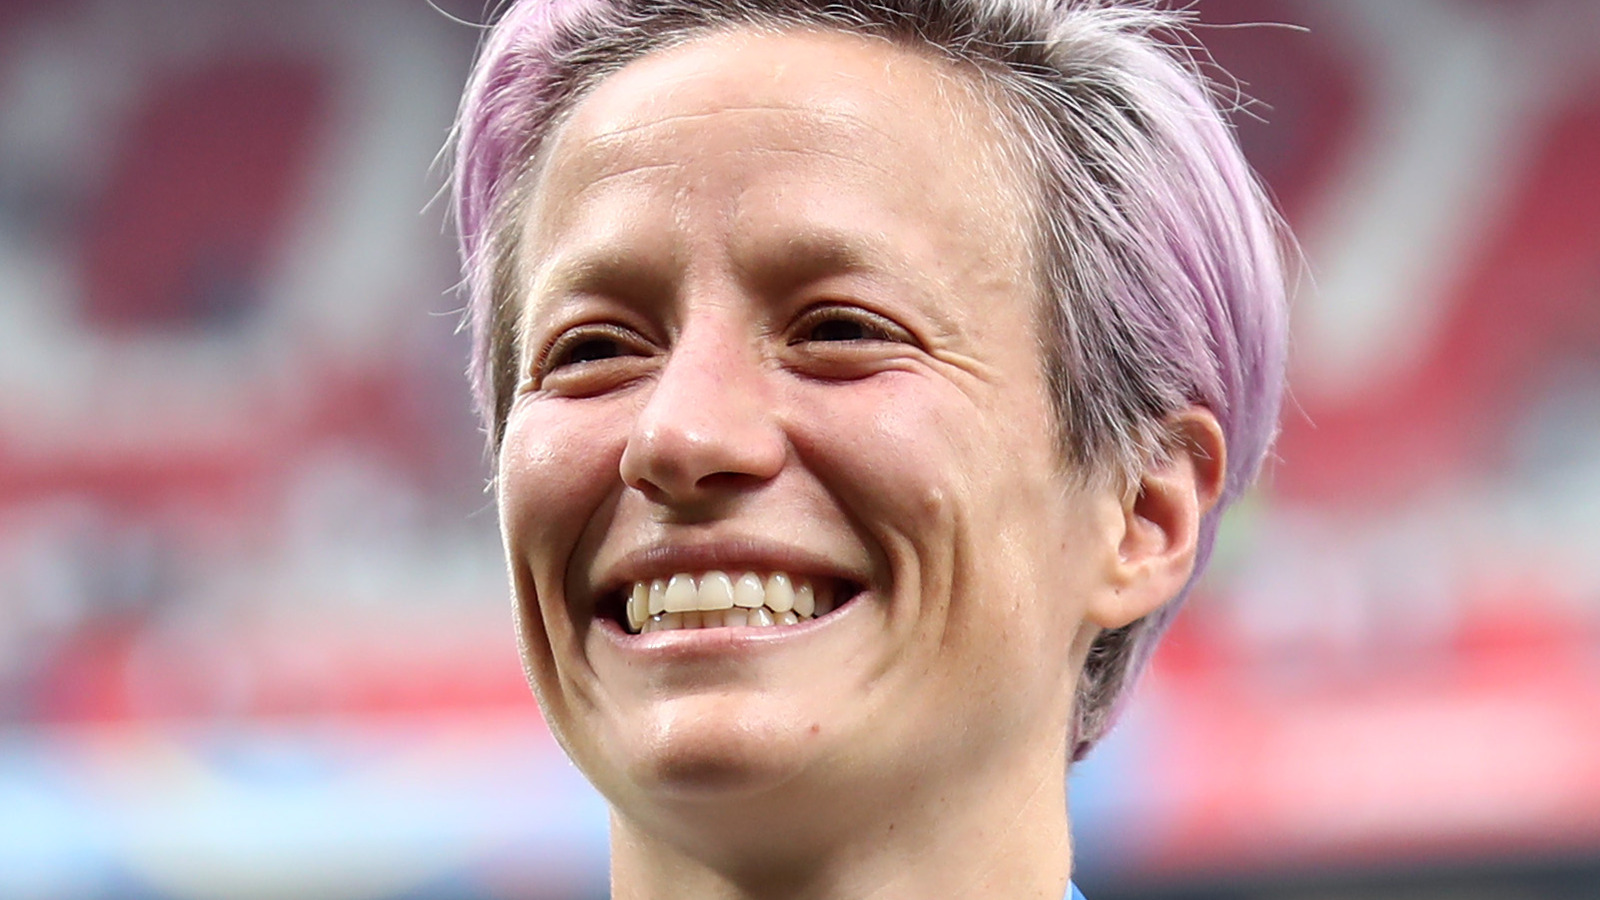 The Transformation Of Megan Rapinoe From 3 To 36 